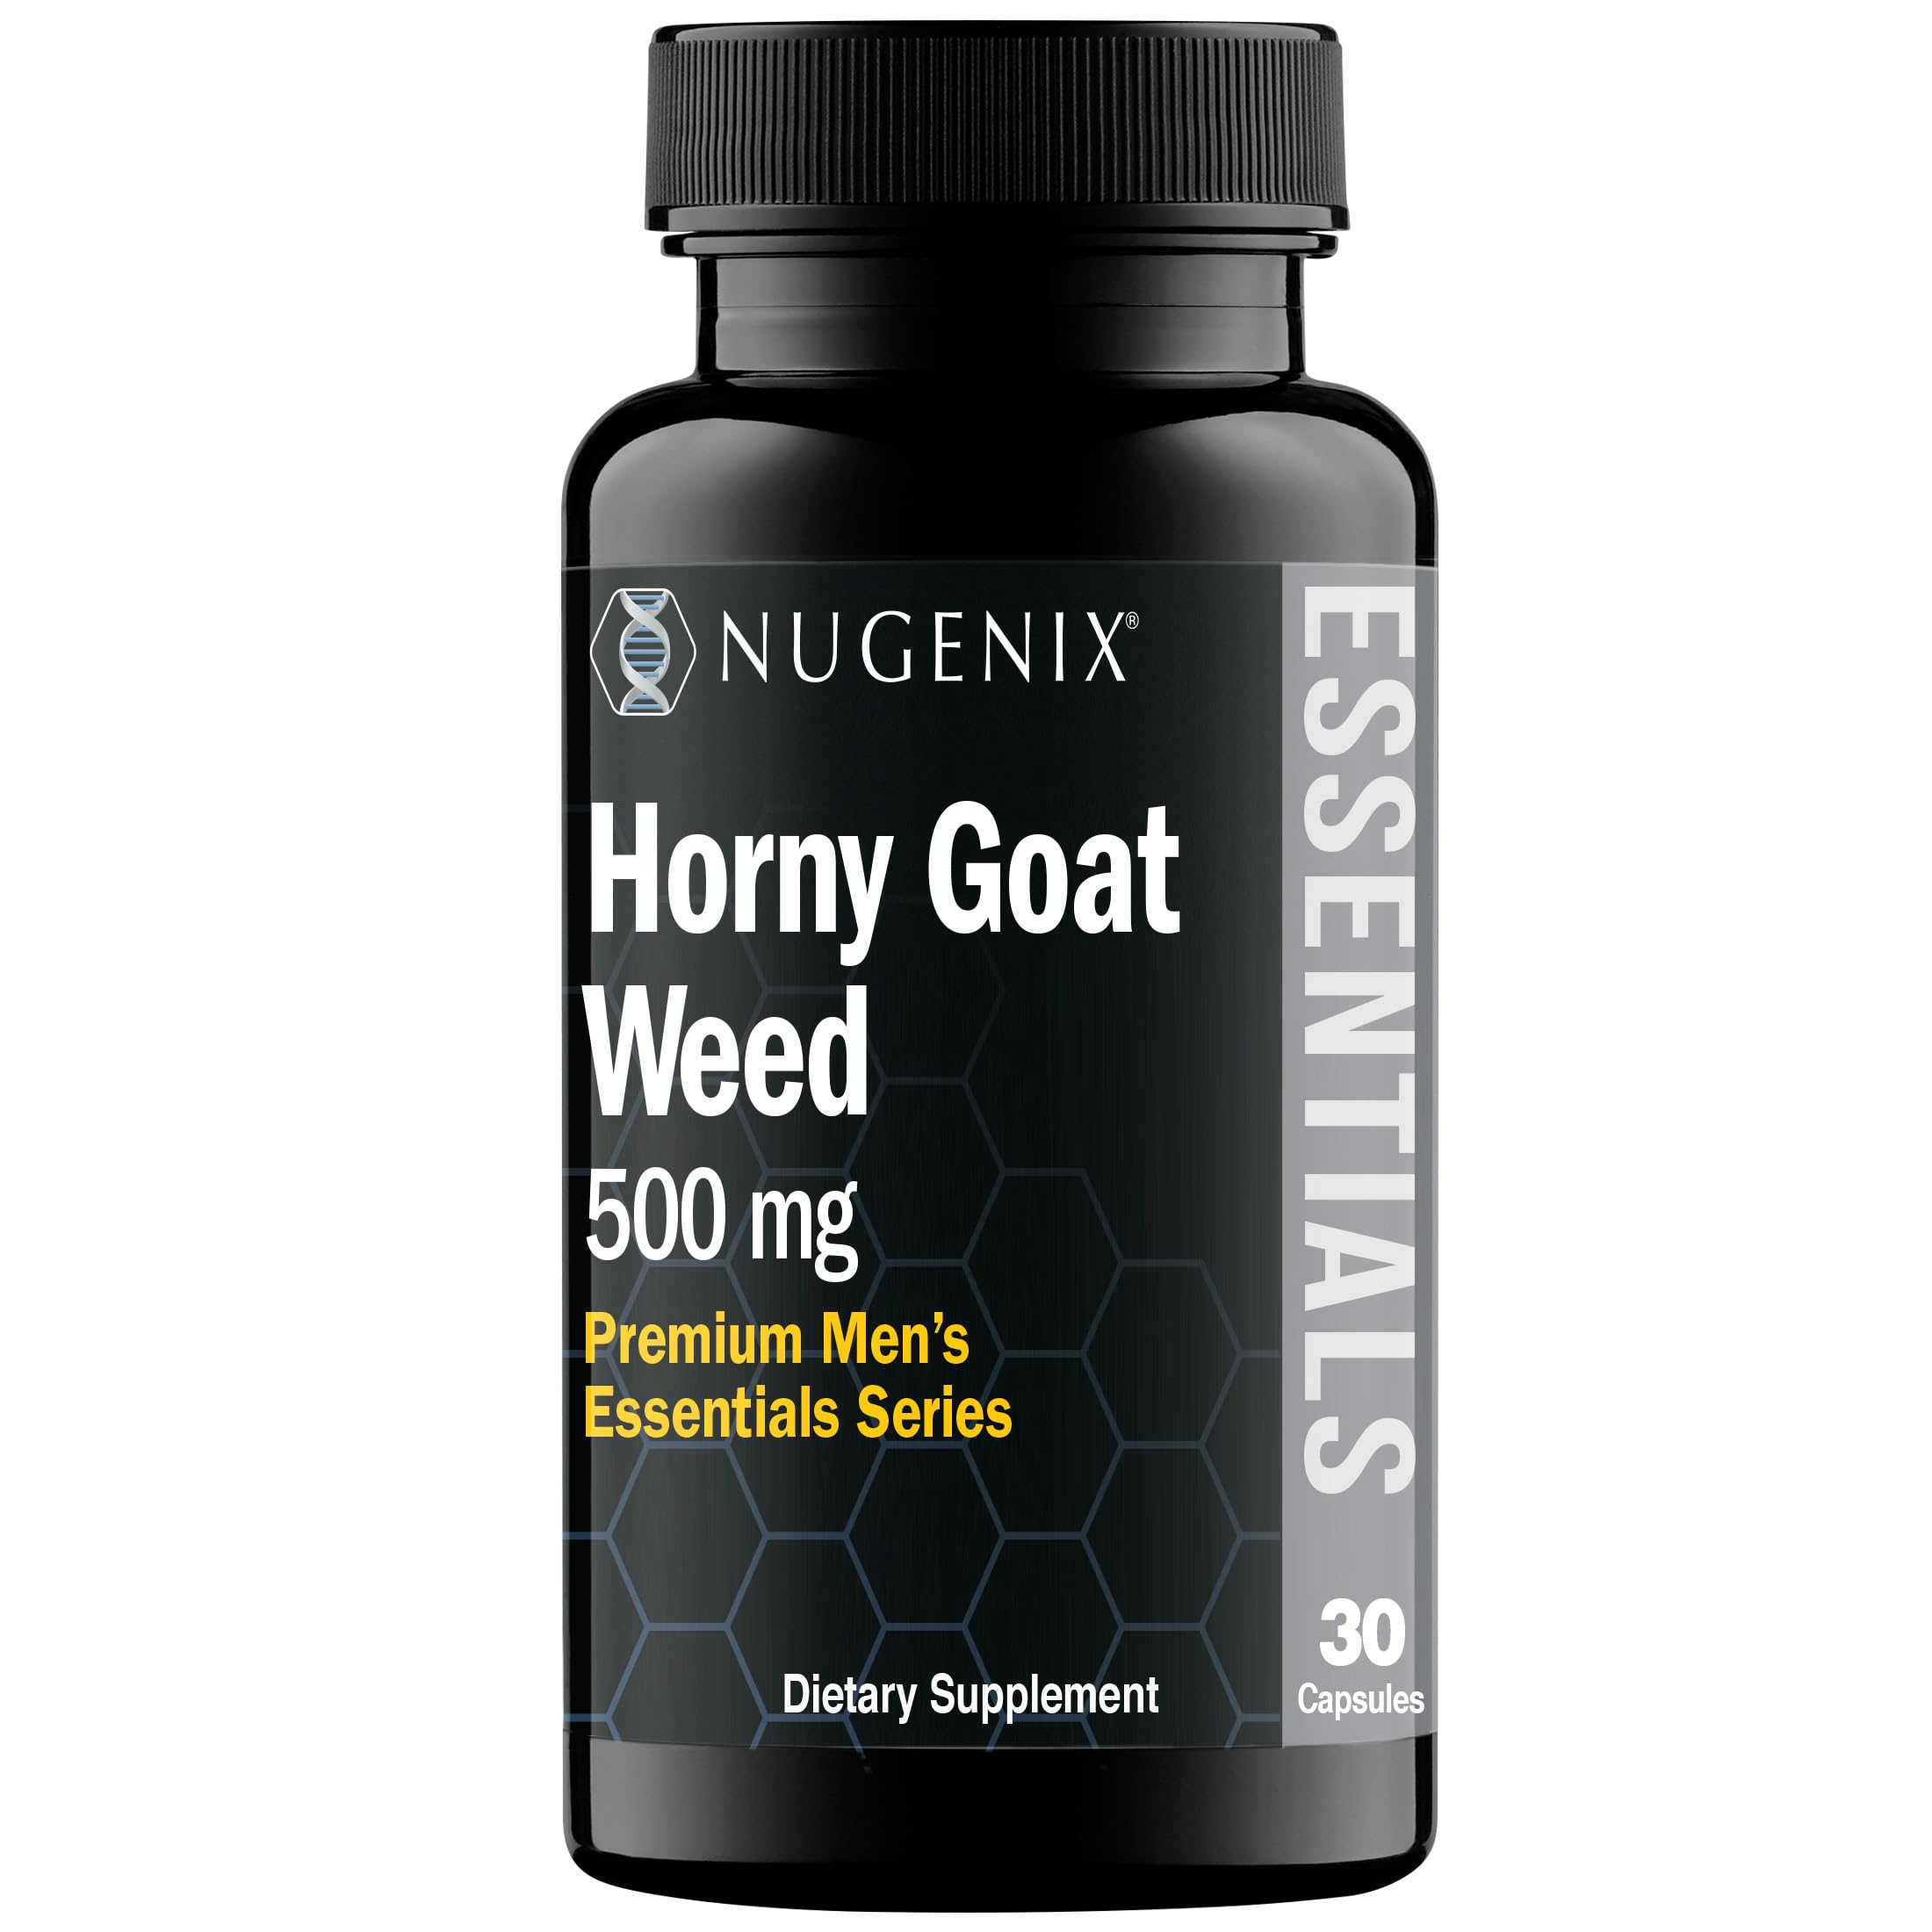 Nugenix Total-T Essentials Horny Goat Weed - Free and Total Testosterone Booster, Support for Men's Health and Vitality